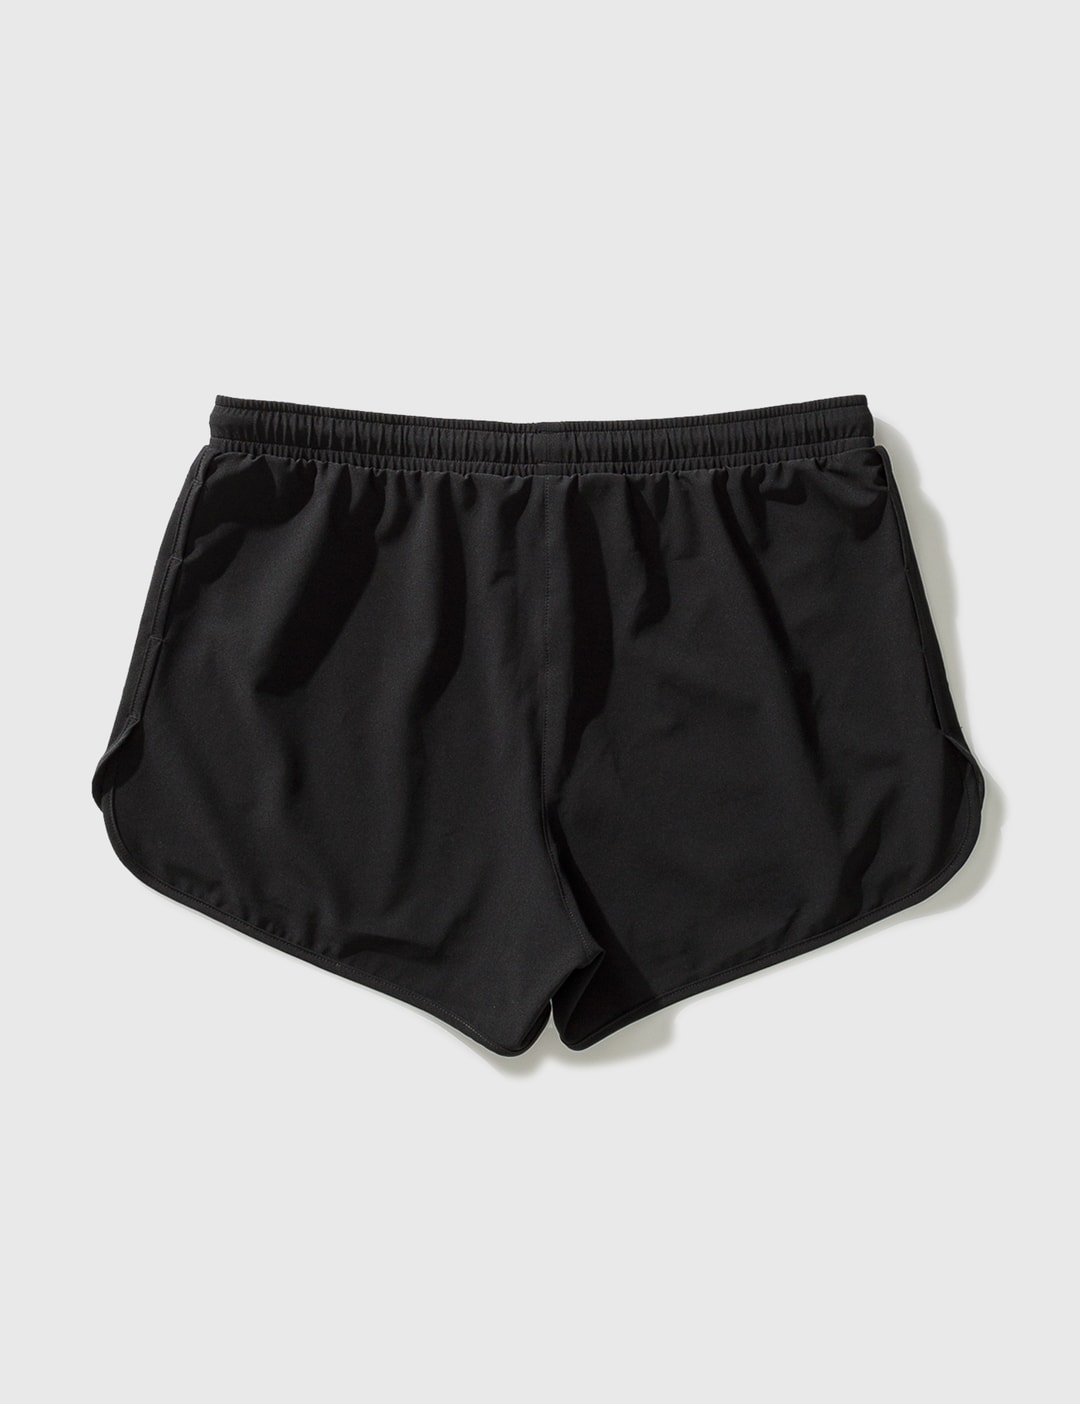 District Vision - Simon Race Shorts | HBX - Globally Curated Fashion ...